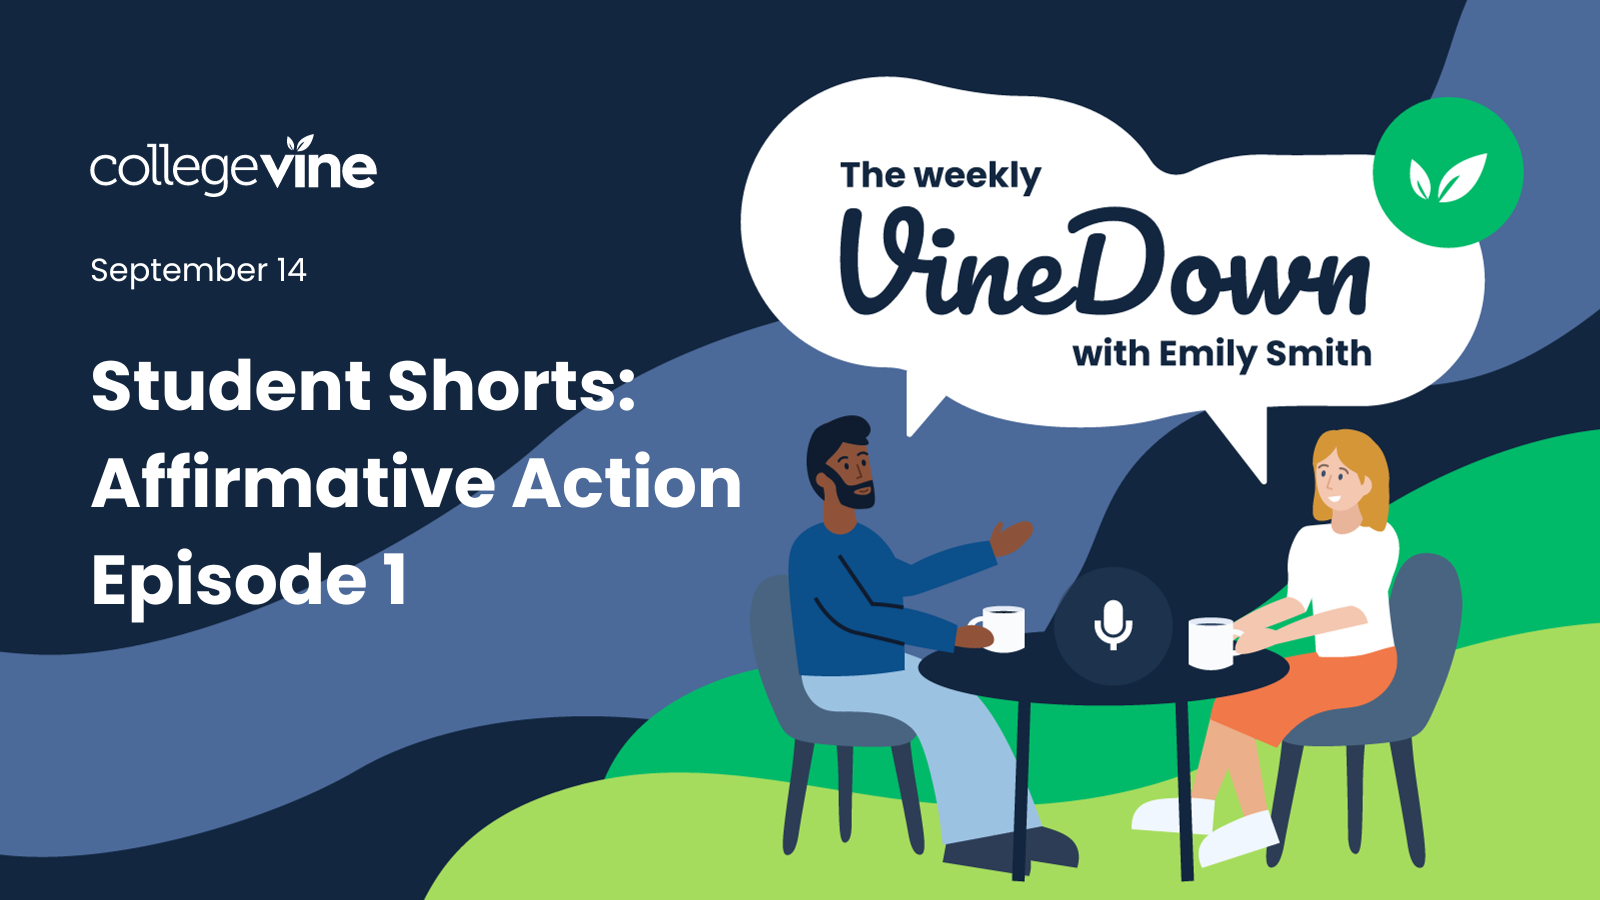 The Weekly VineDown: Affirmative Action Student Short Episode 1